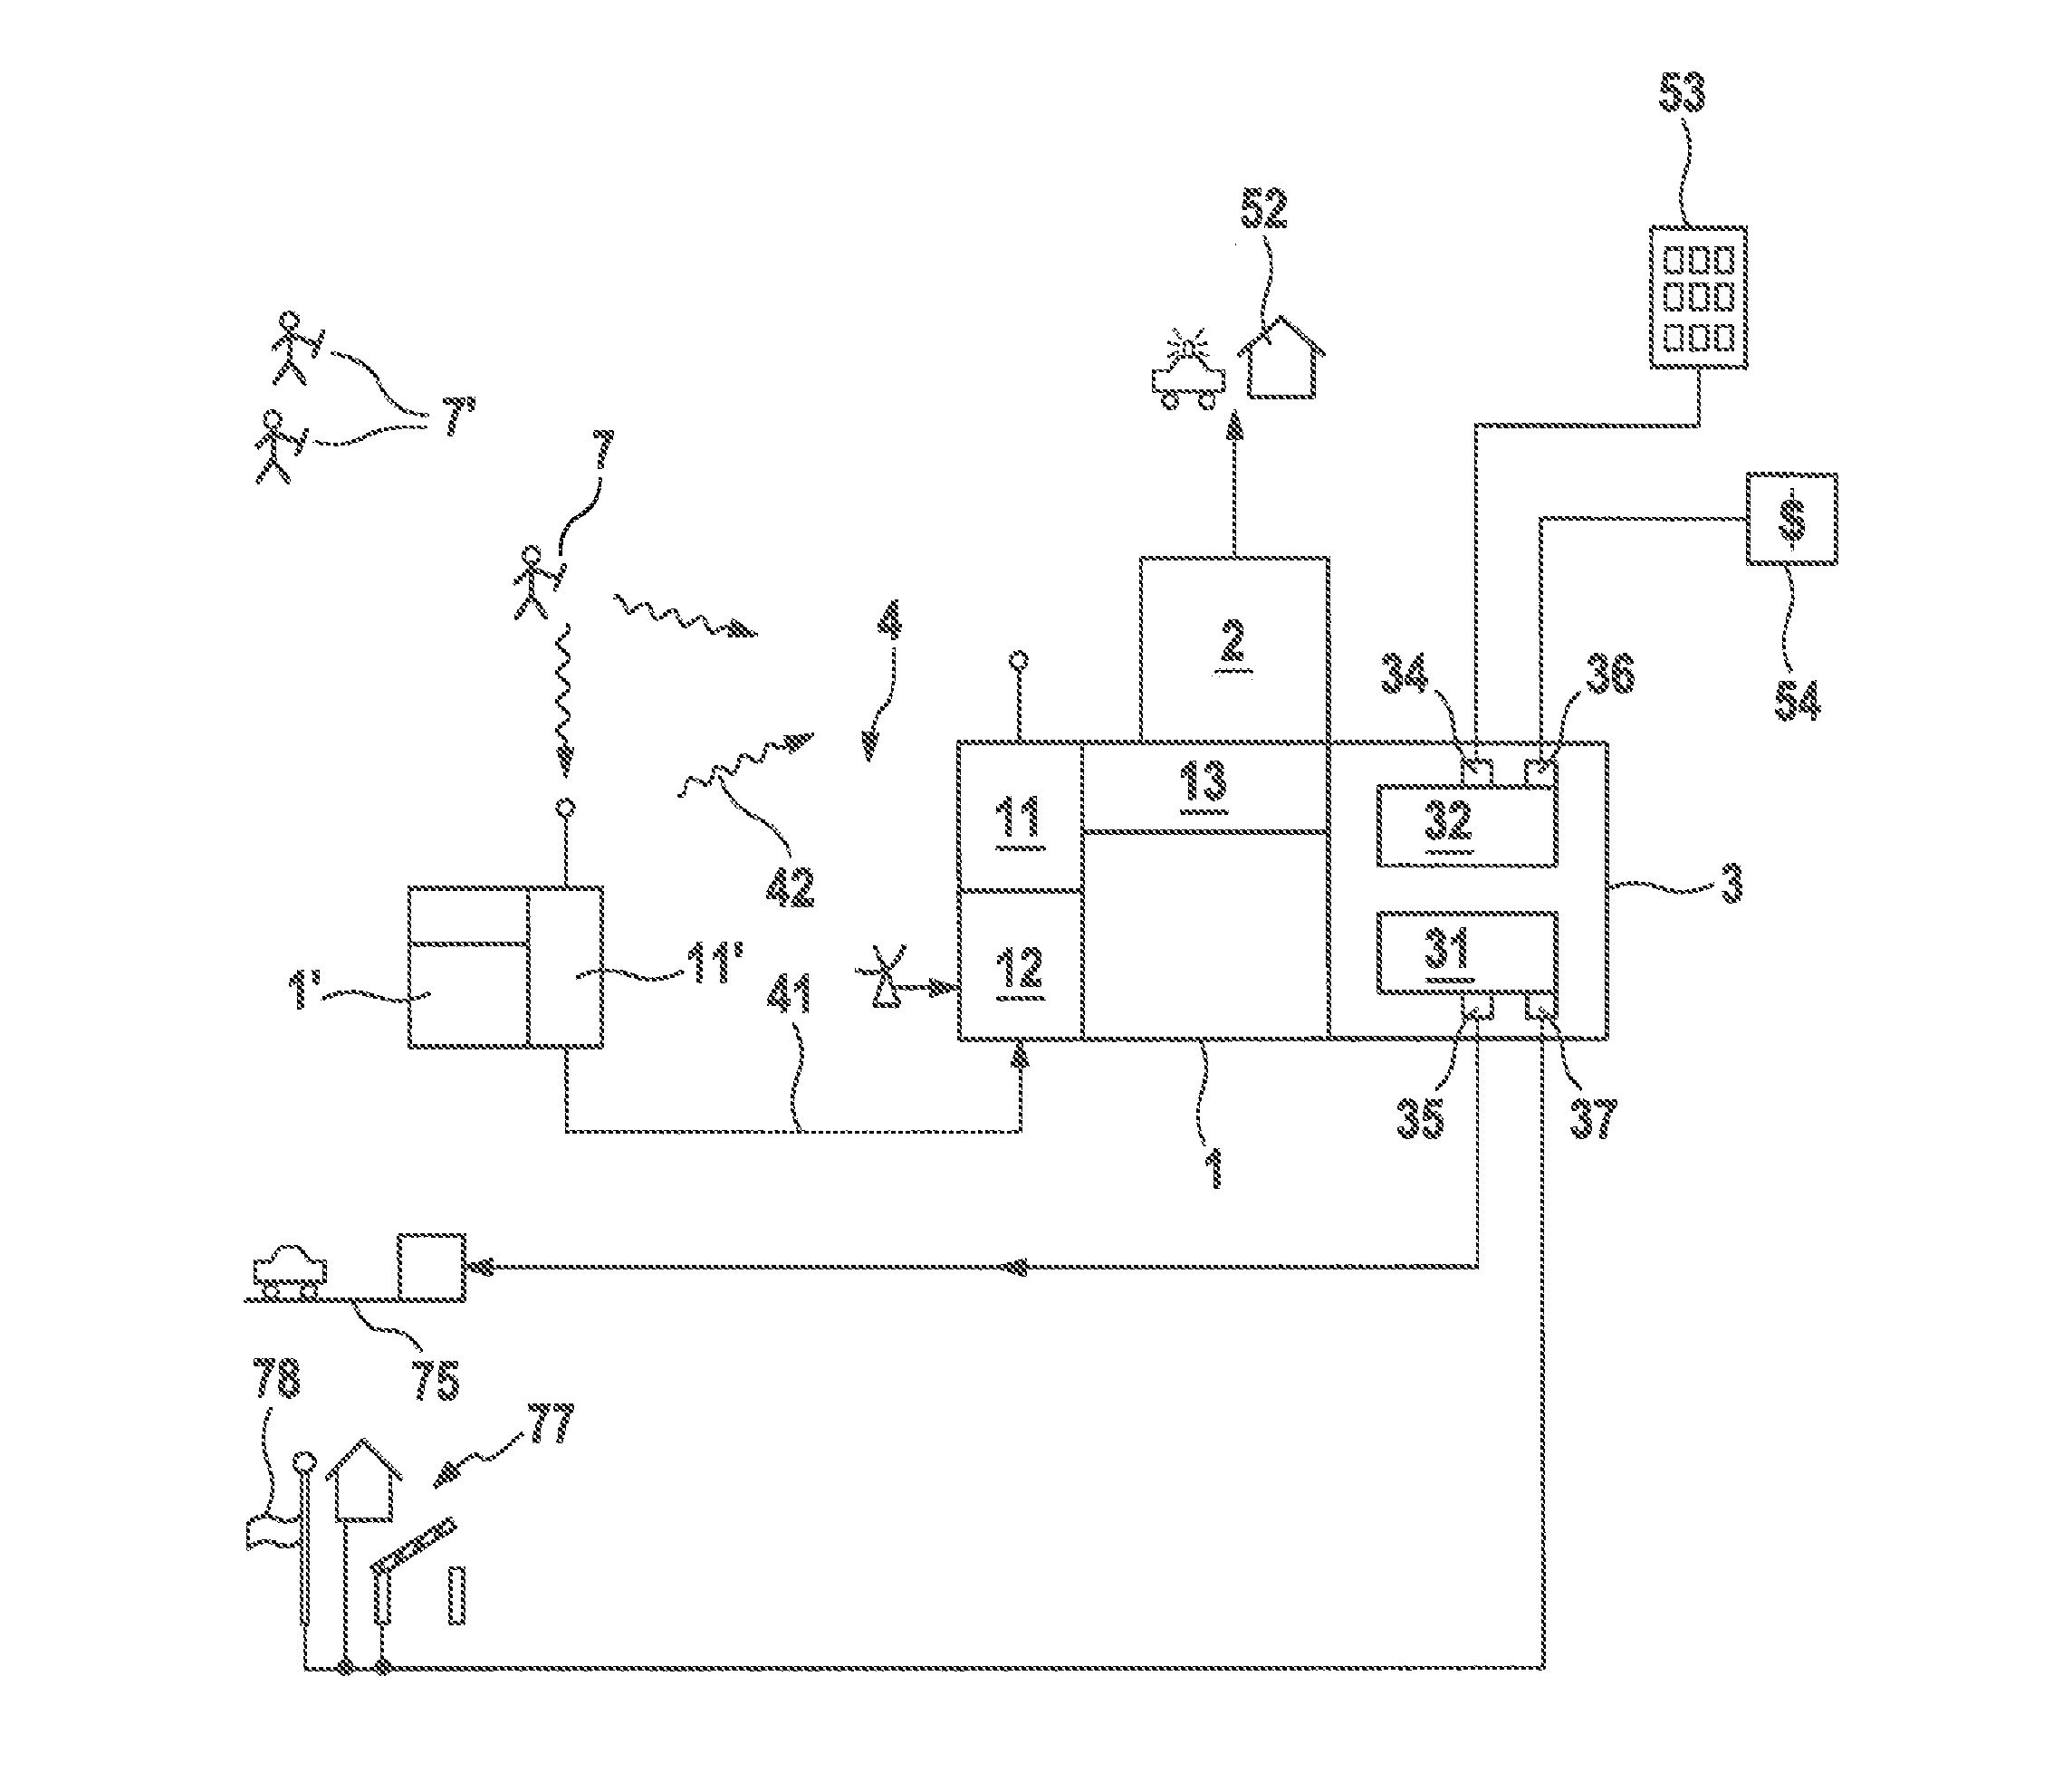 Person and property protection system and method